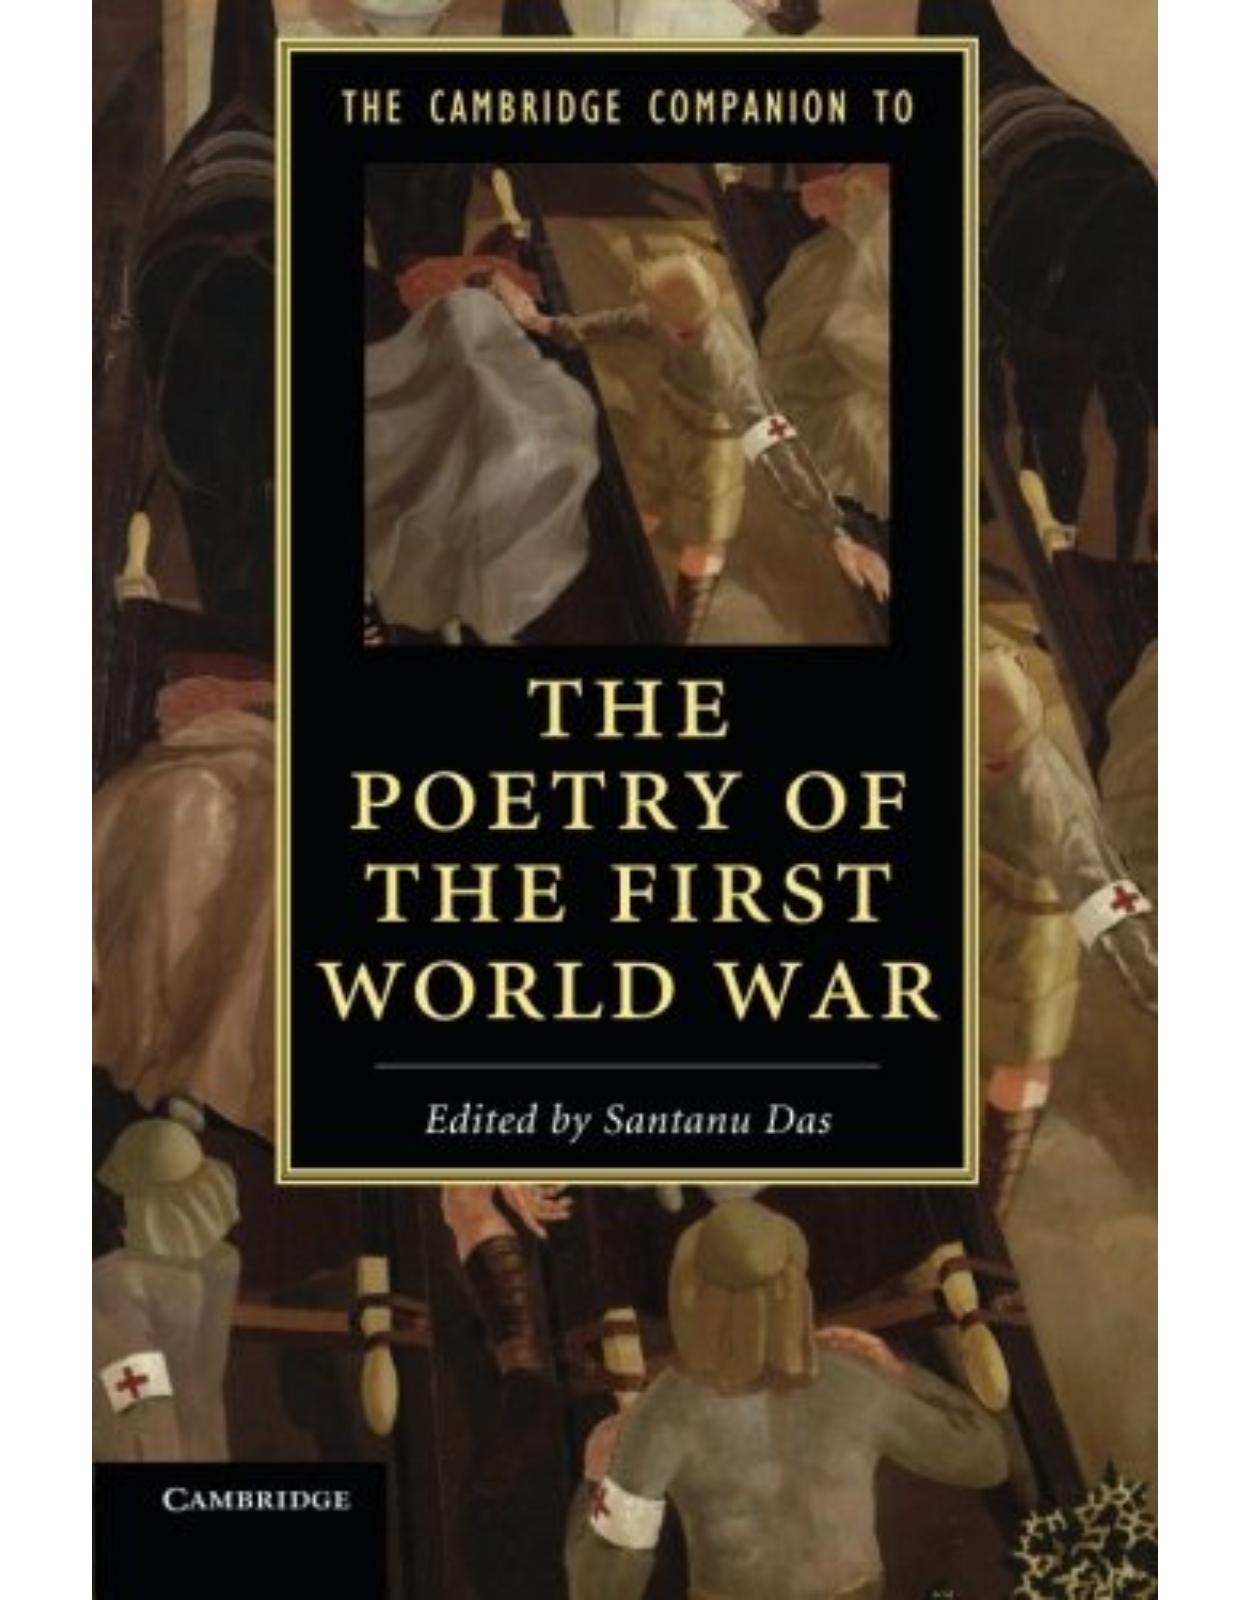 The Cambridge Companion to the Poetry of the First World War (Cambridge Companions to Literature)